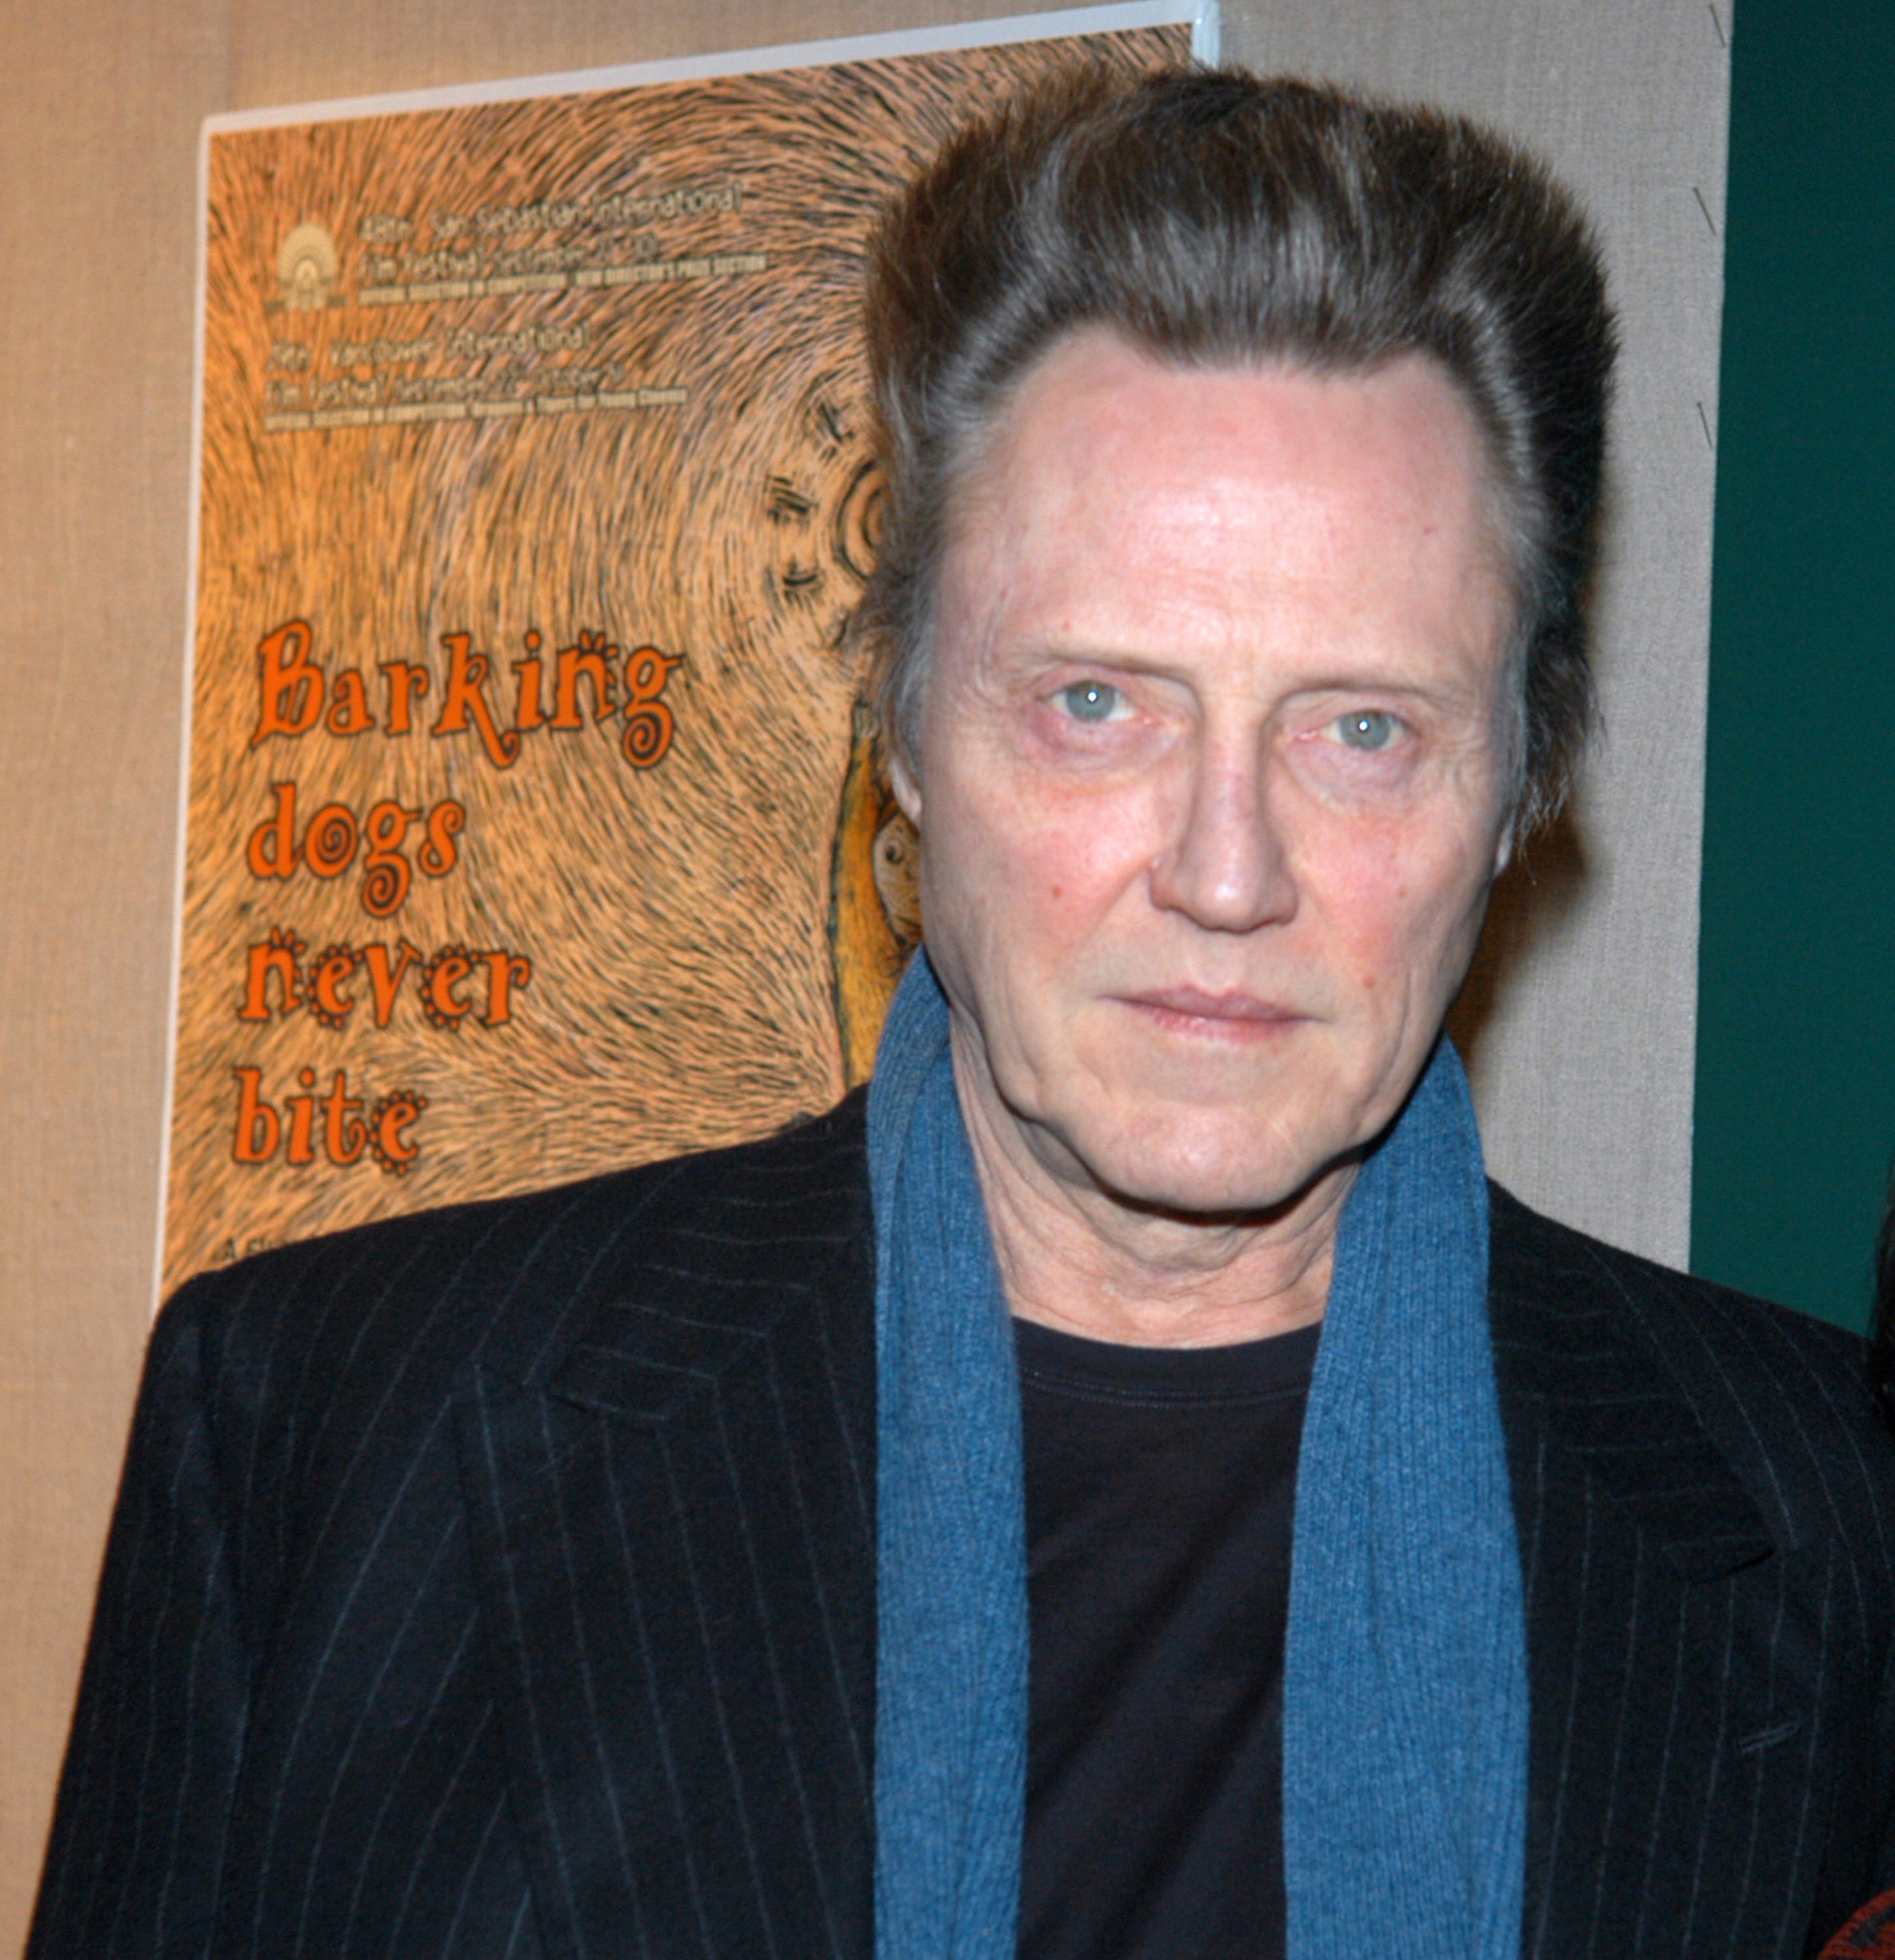 Christopher Walken during The Film Society of Lincoln Center's Walter Reade Theater Presents "Inventing Christopher Walken" at Walter Reade Theater in New York City, New York, United States. | Source: Getty Images